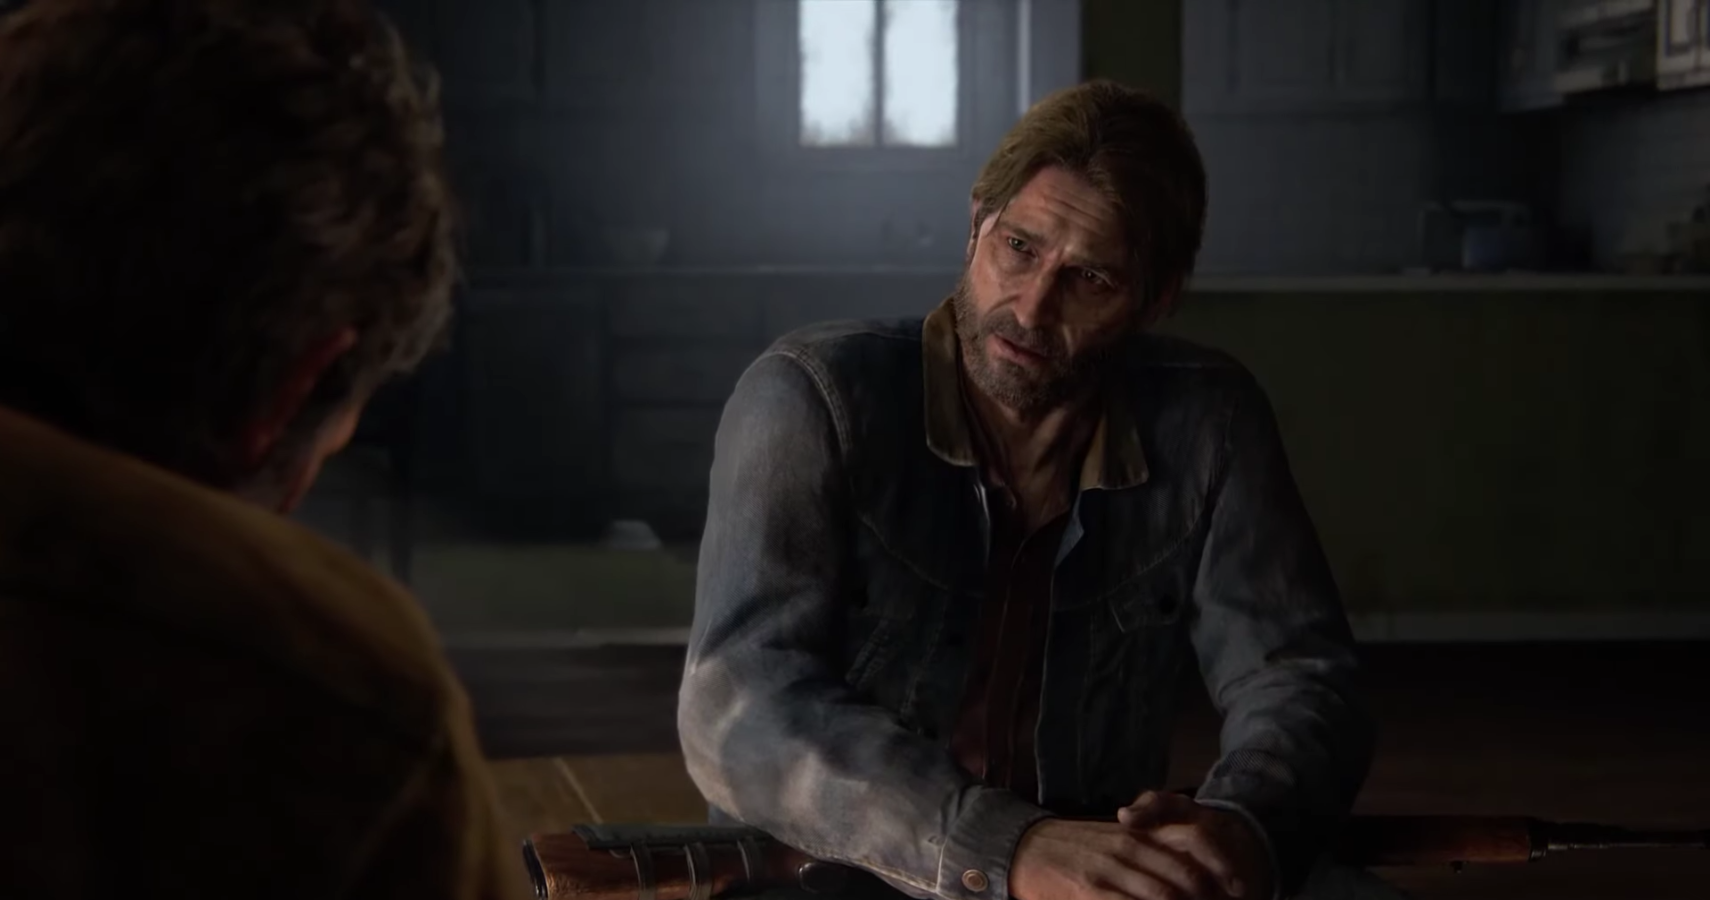 The Last Of Us Part II' includes accurate footprints and traces of Tommy